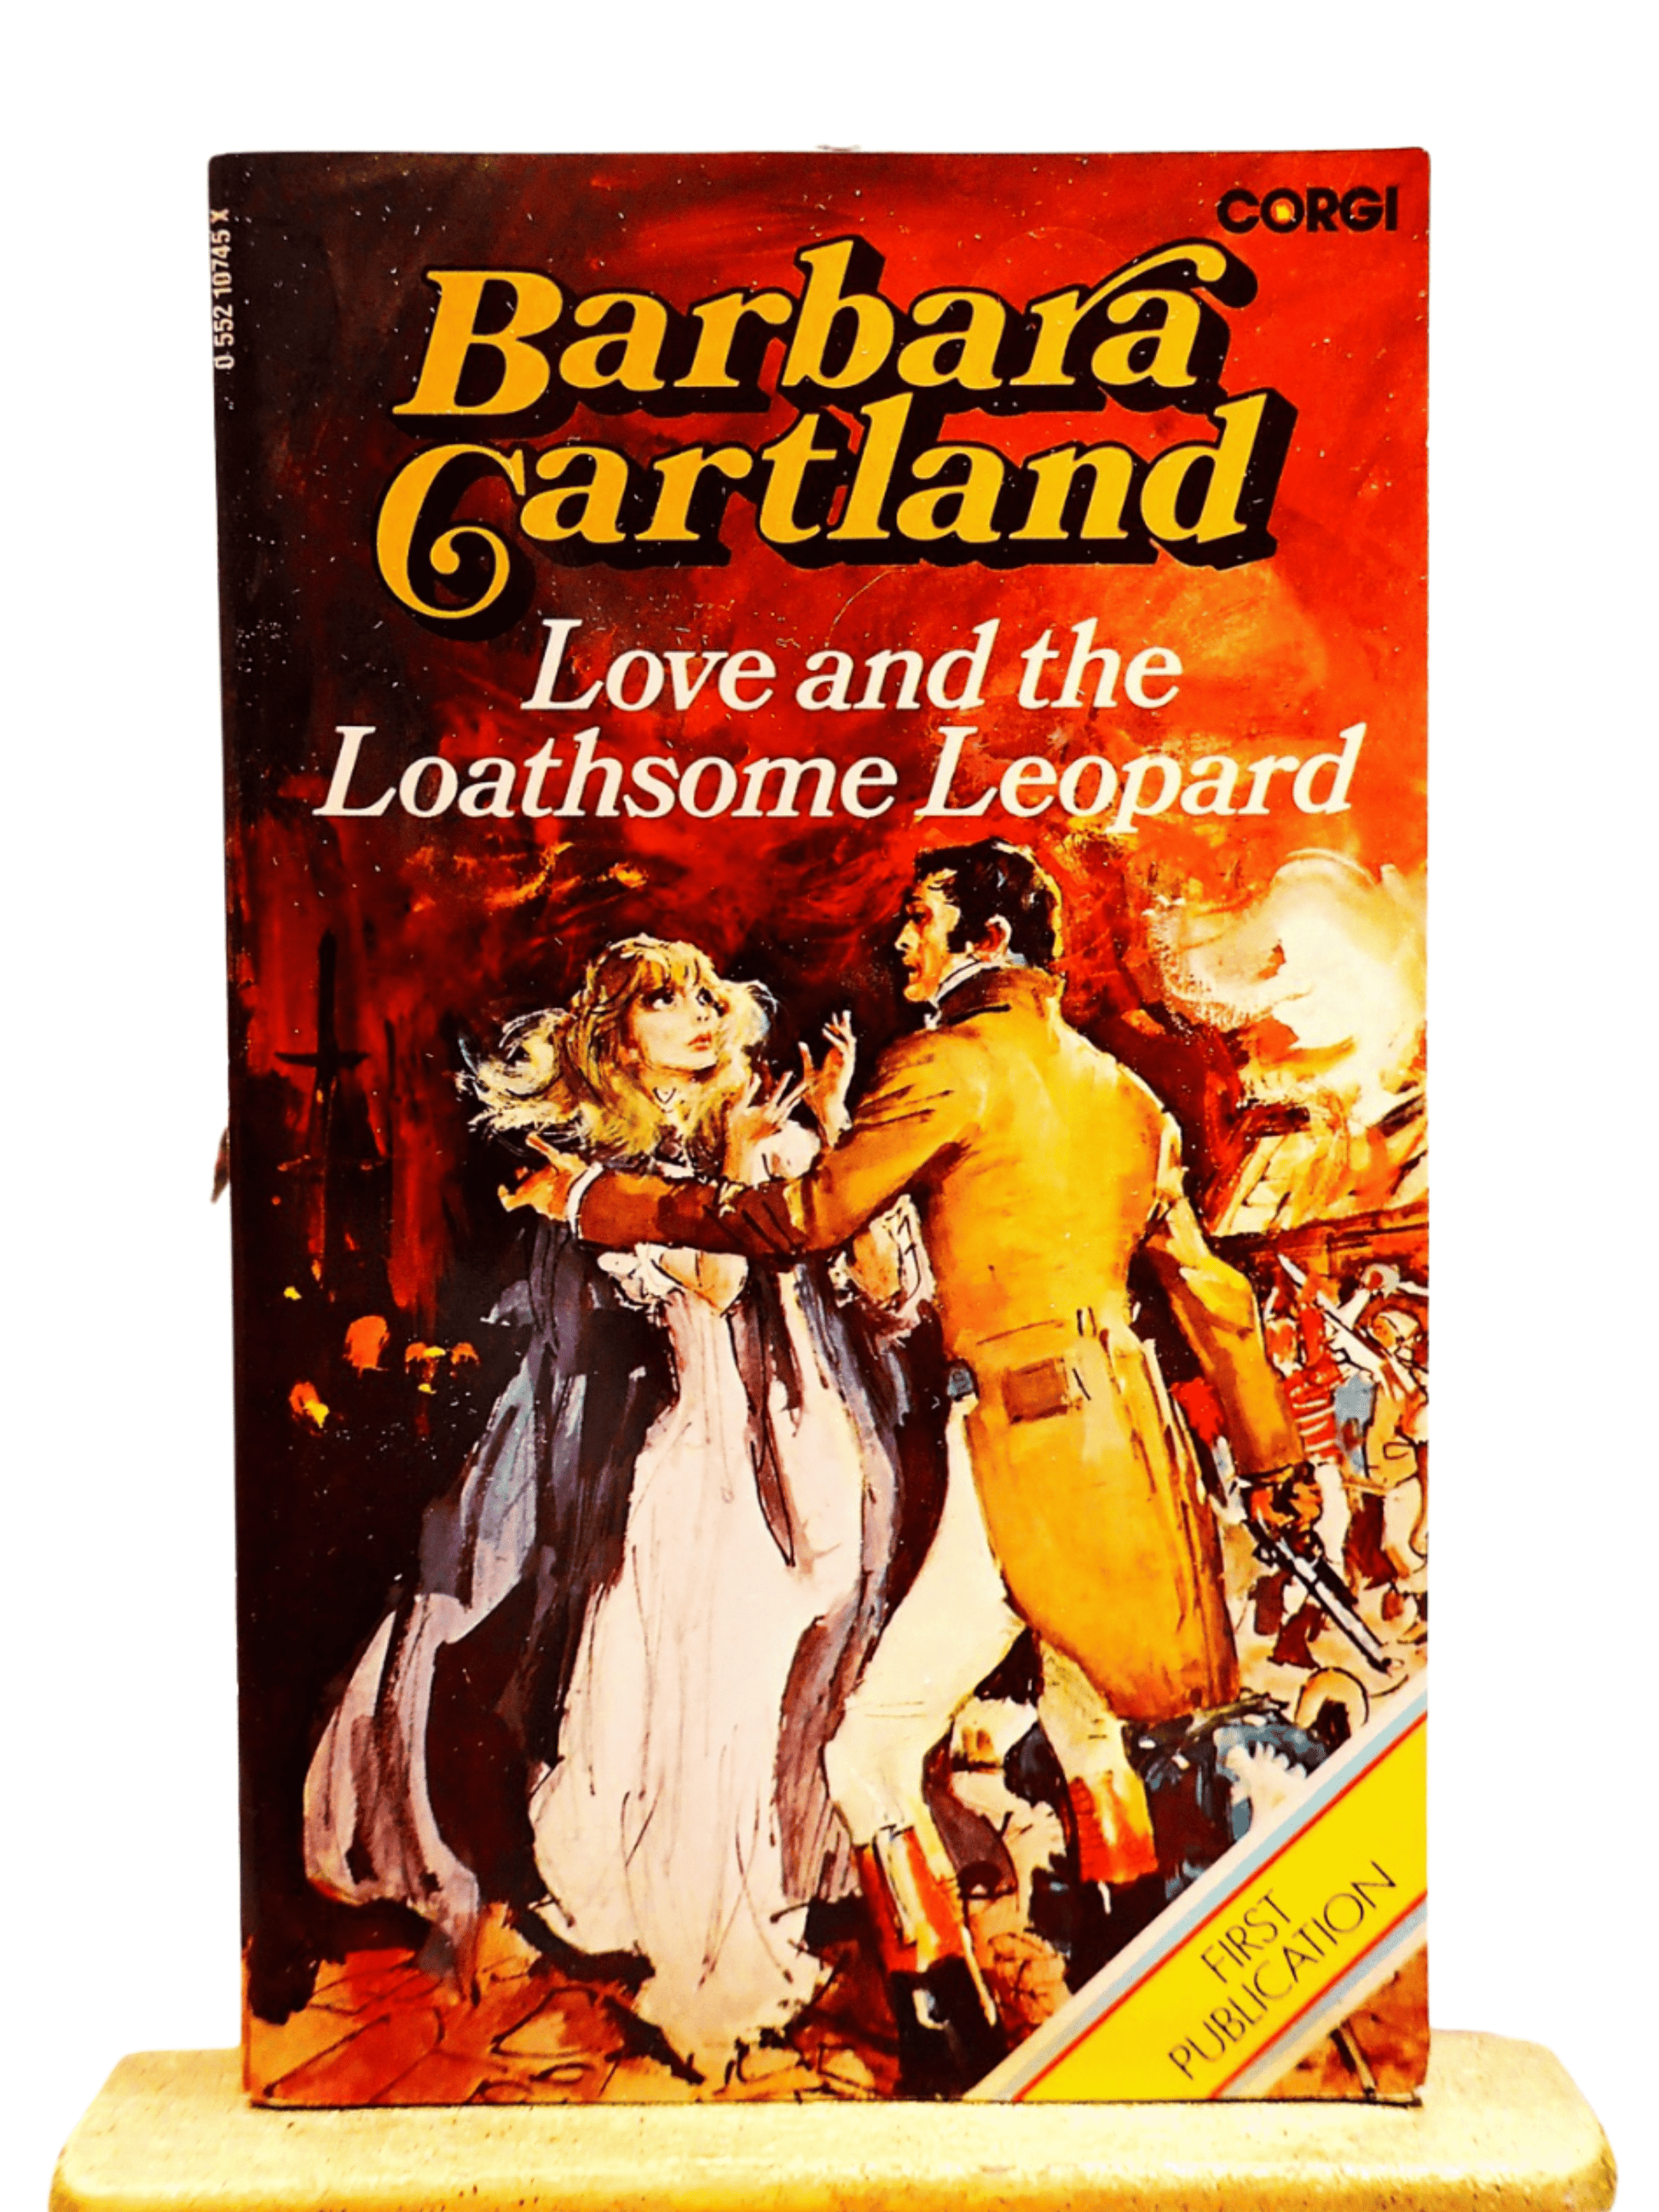 Front cover of Love and the Loathsome Leopard Barbara Cartland Corgi paperback showing a frightened woman in a cape being rescued by a handsome man. 